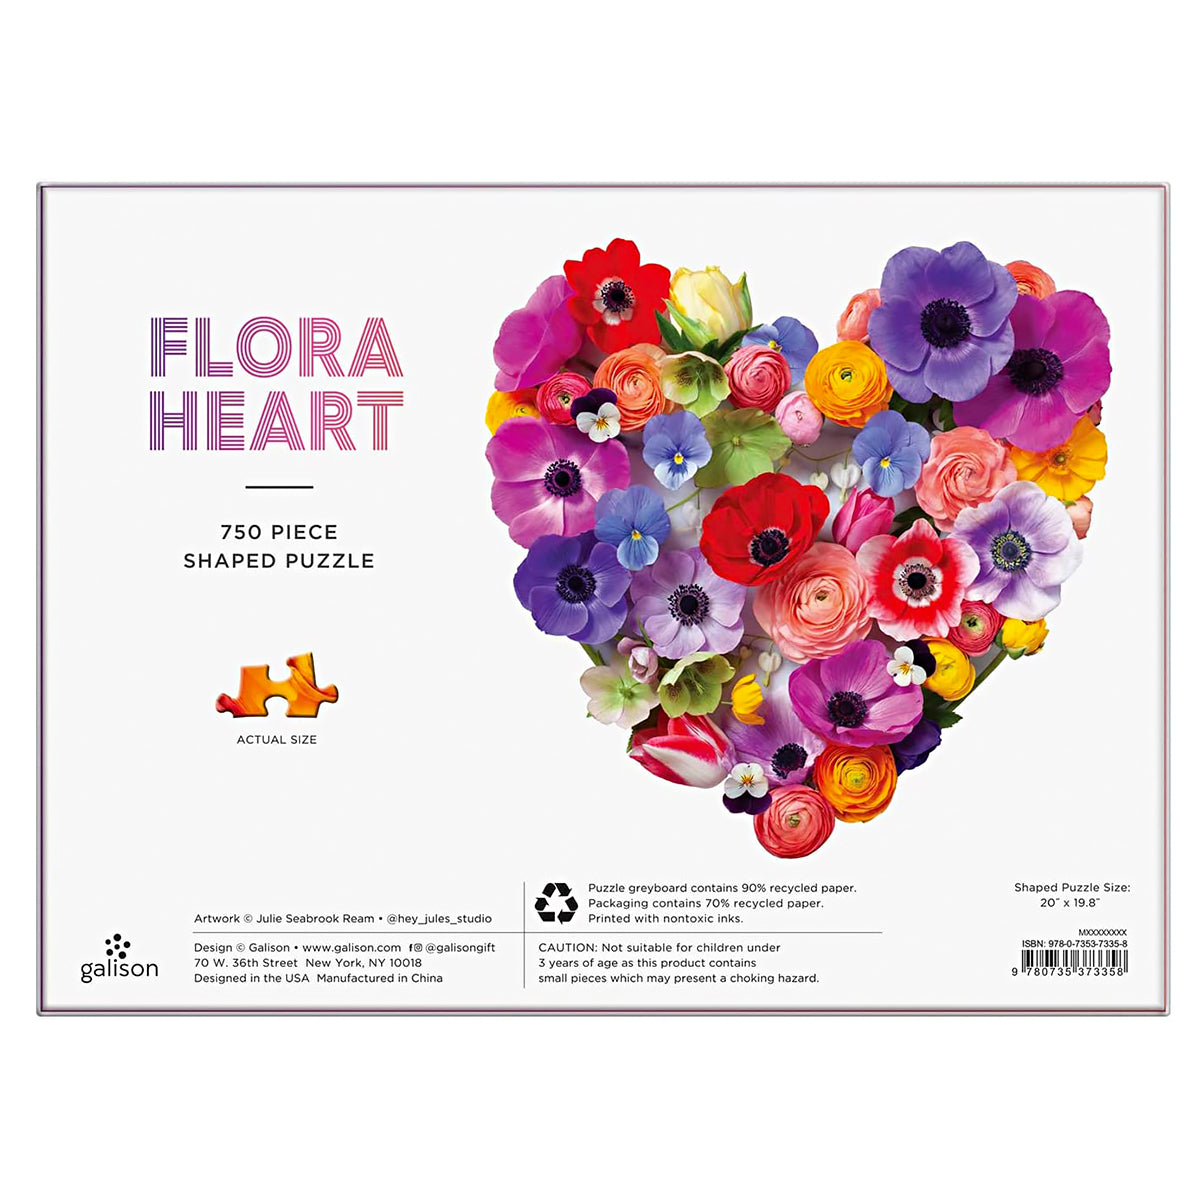 750-piece shaped puzzle – The Flora Heart jigsaw puzzle from Galison is just the right amount of challenging and exciting, providing hours of fun. The box includes an insert with the puzzle image for reference.